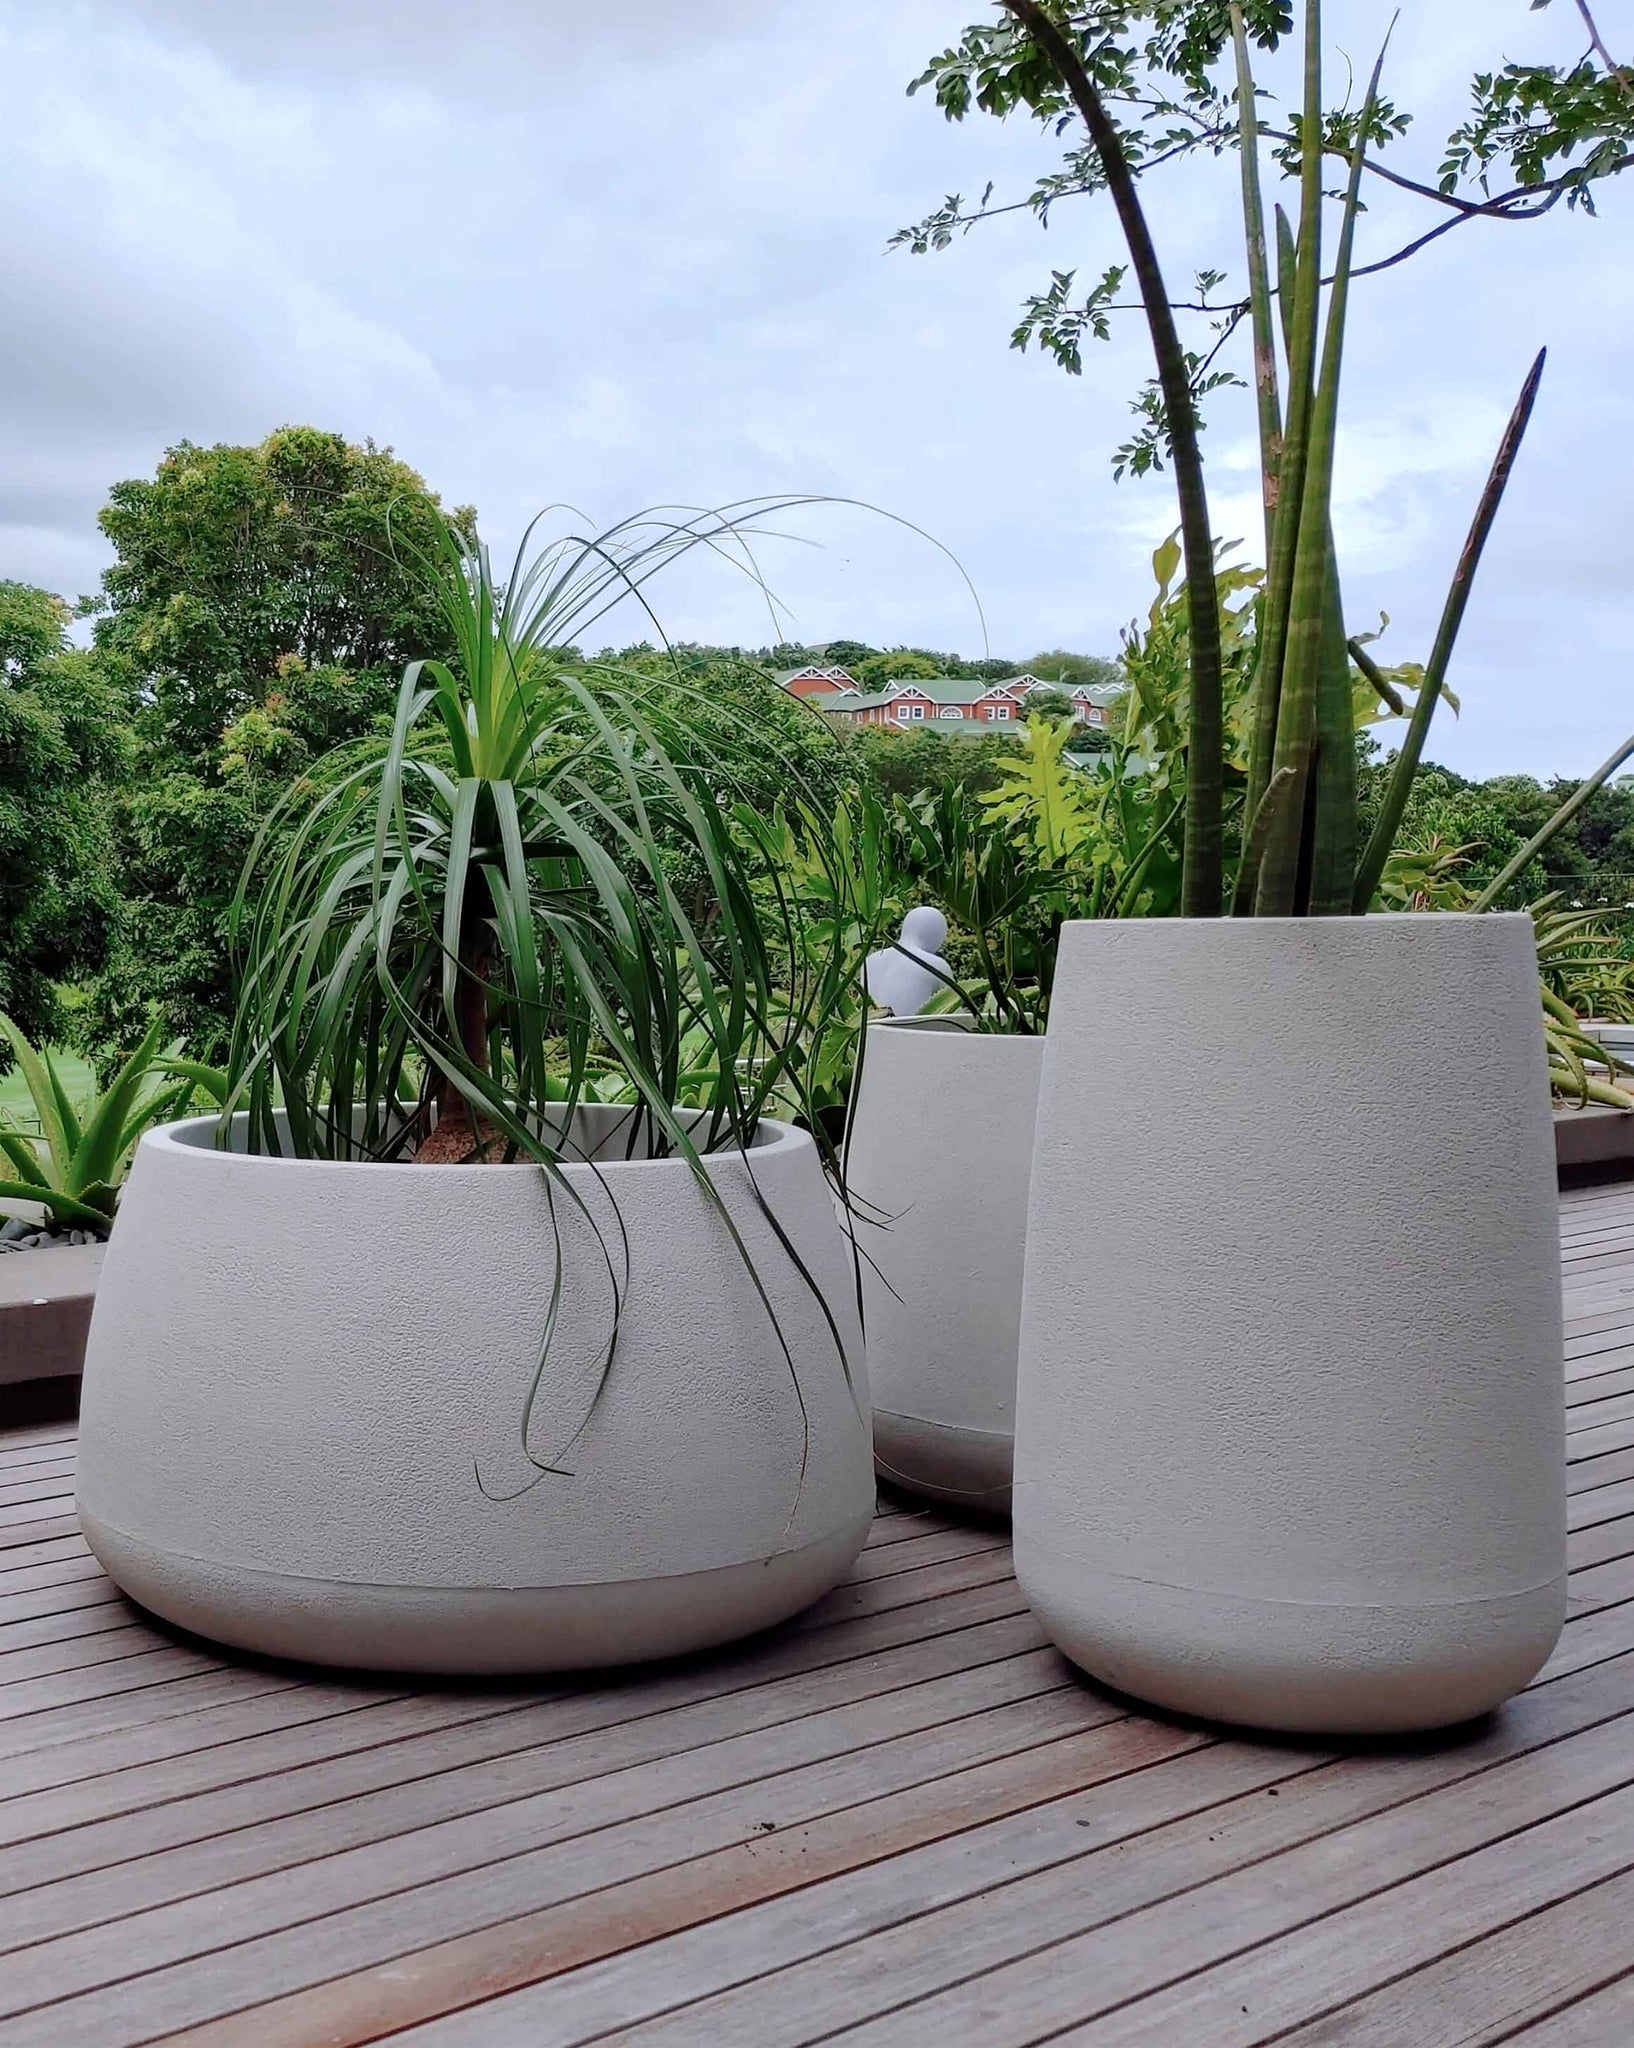 Set of 3 Bio planters, low, medium and tall, all with plants planted in them on the deck in a beautiful  home setting. Colour Sandstone. Orders at Florastyle by Hingham. Textured finish.